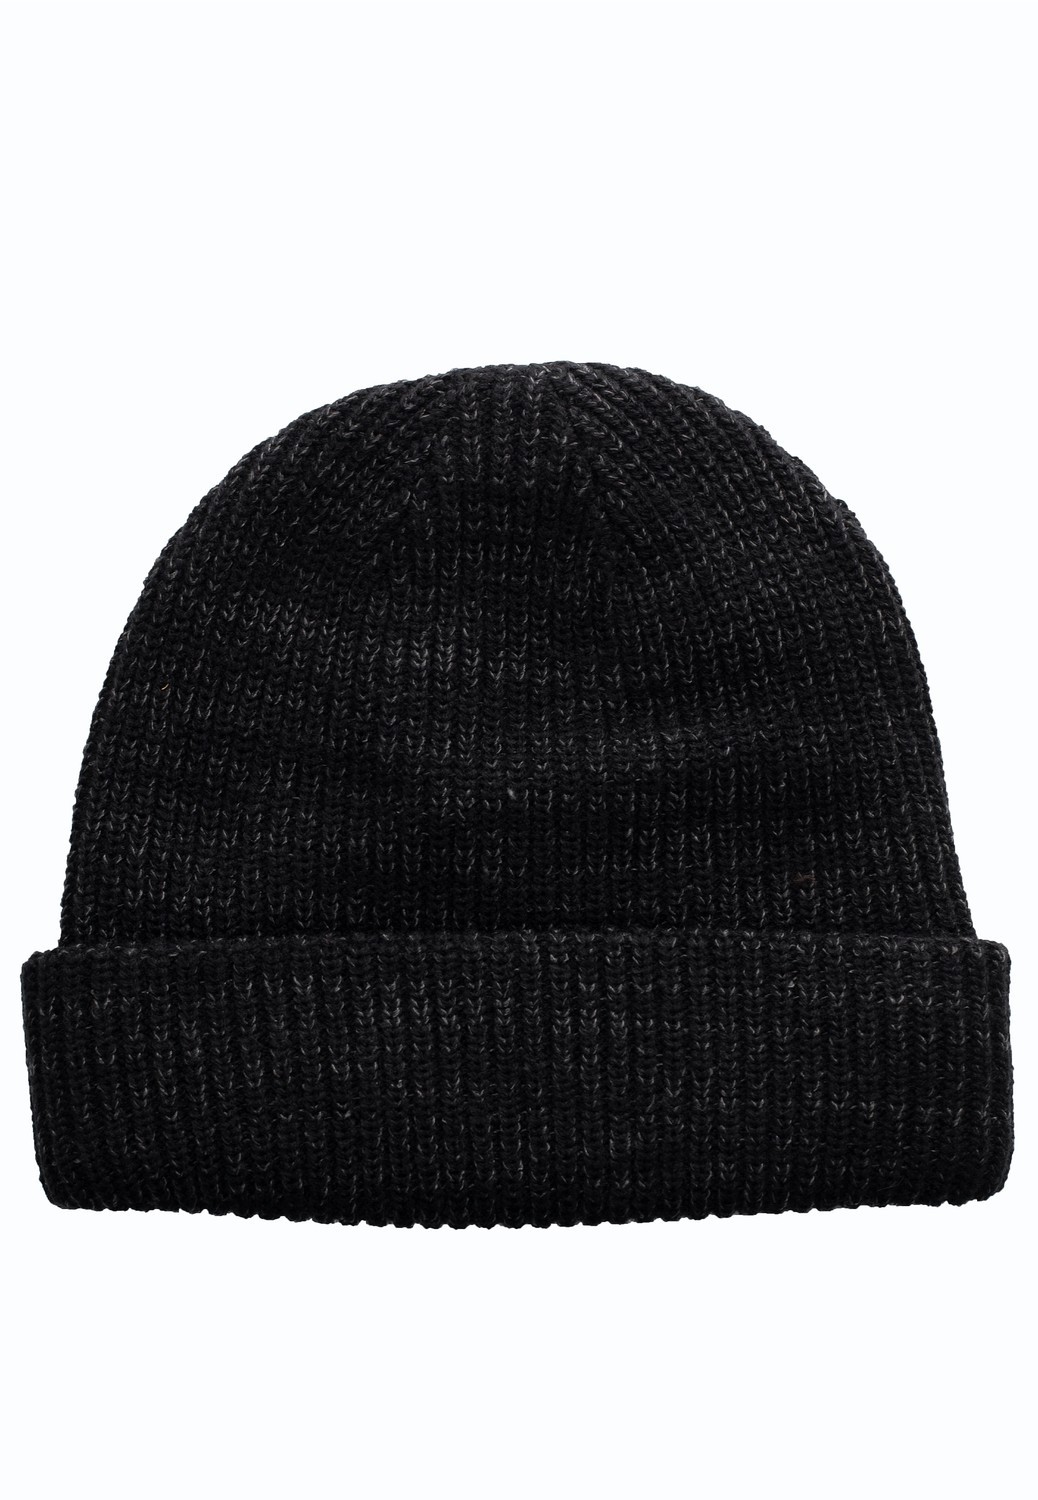 The North Face - Salty Dog TNF Black - Beanies